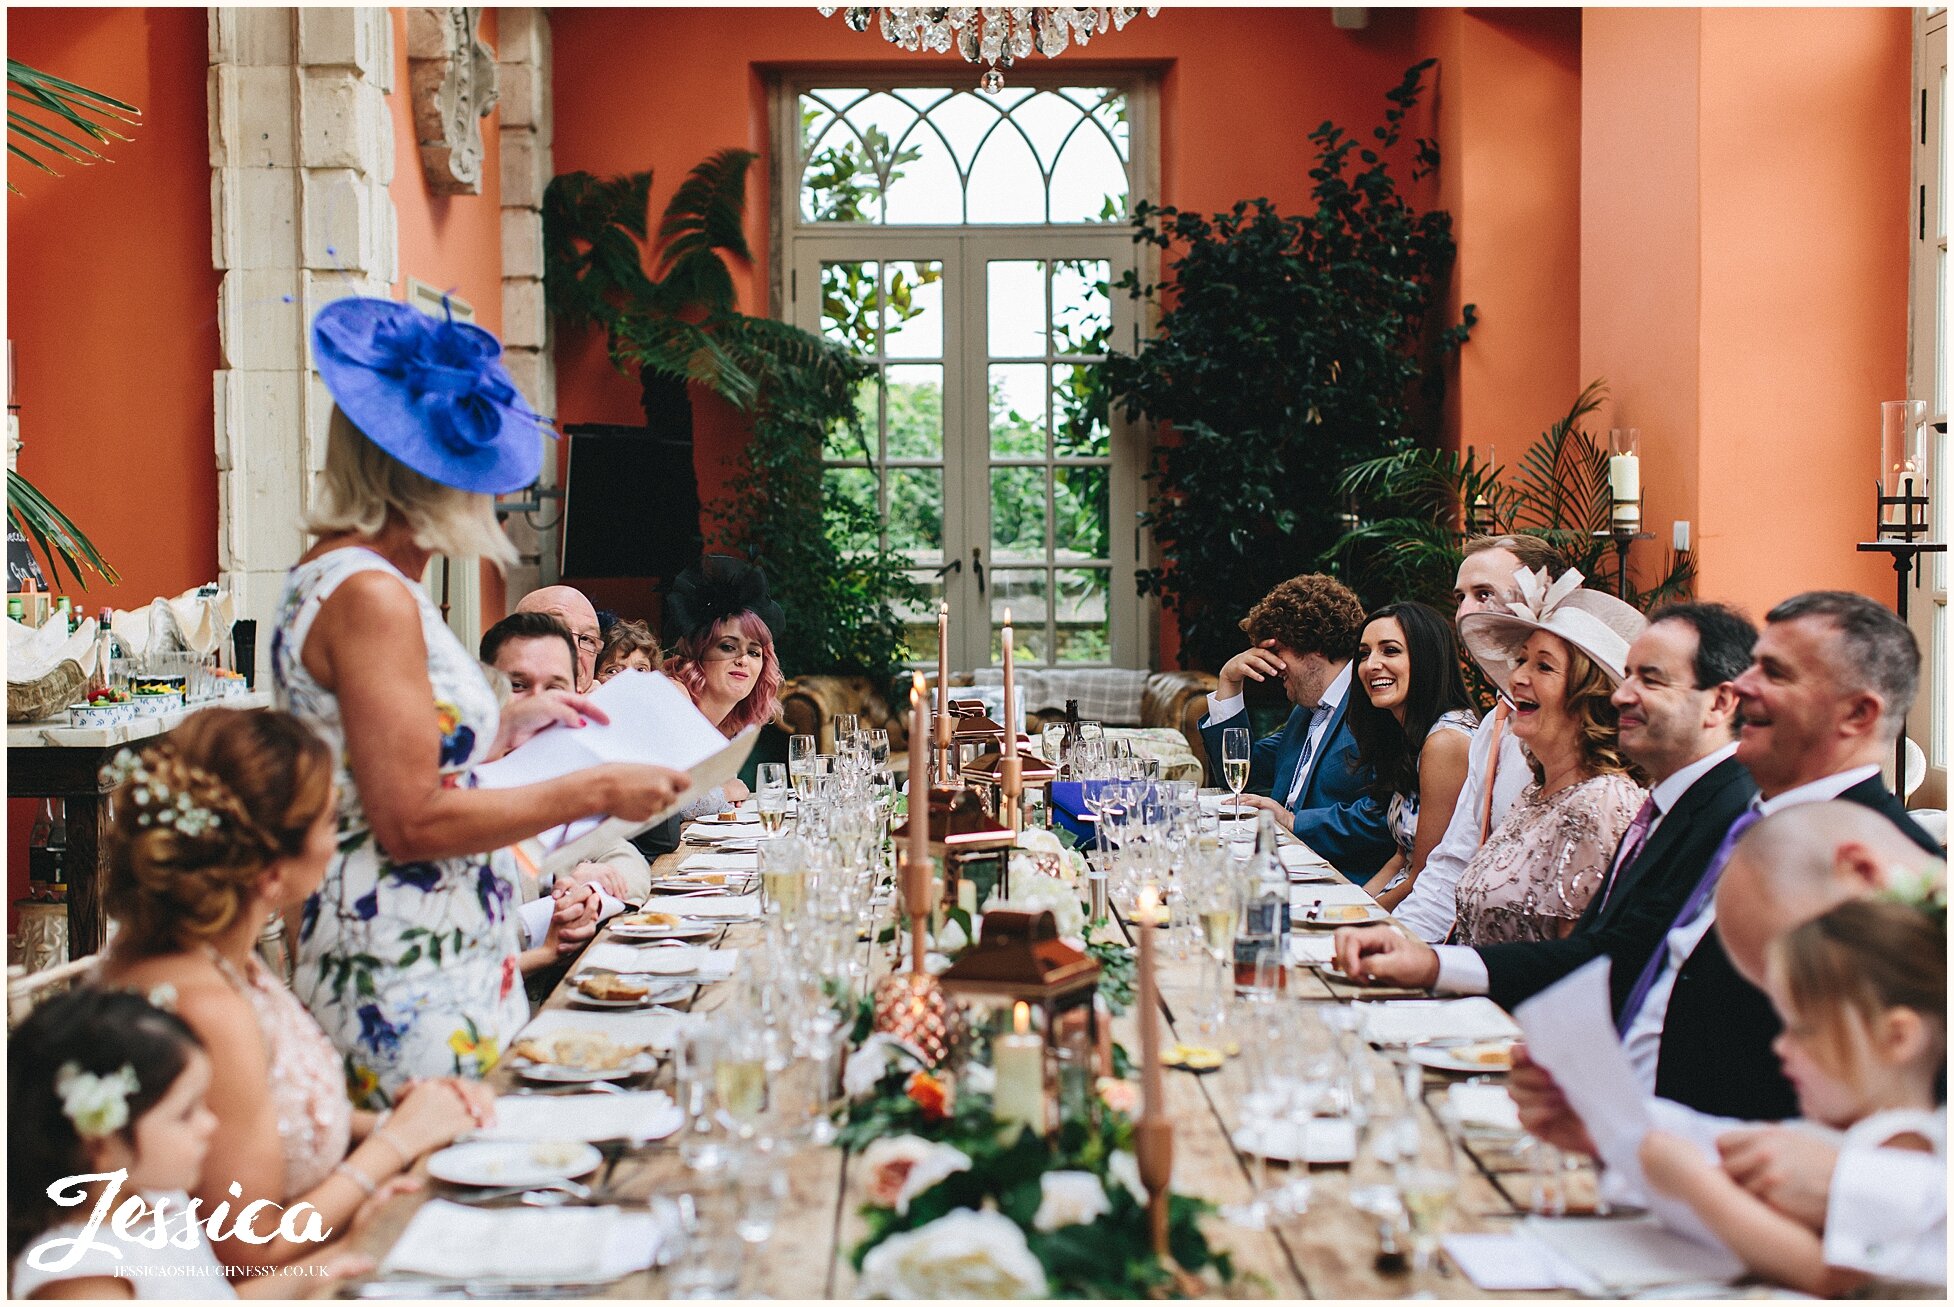 mother of the bride stands to deliver speech before meal - the lost orangery wedding photography